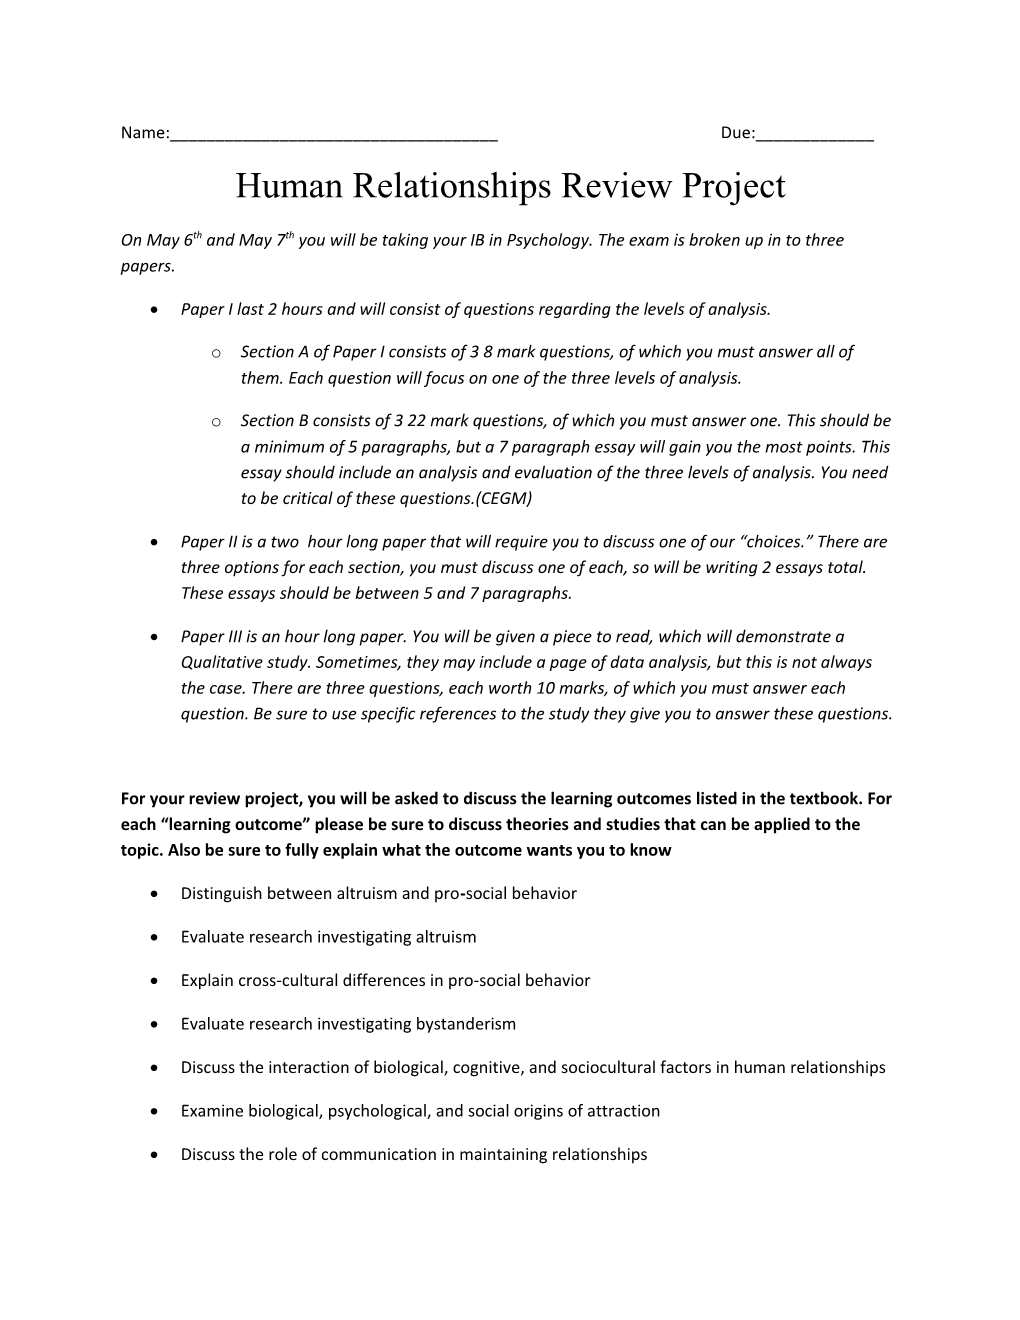 Human Relationships Review Project